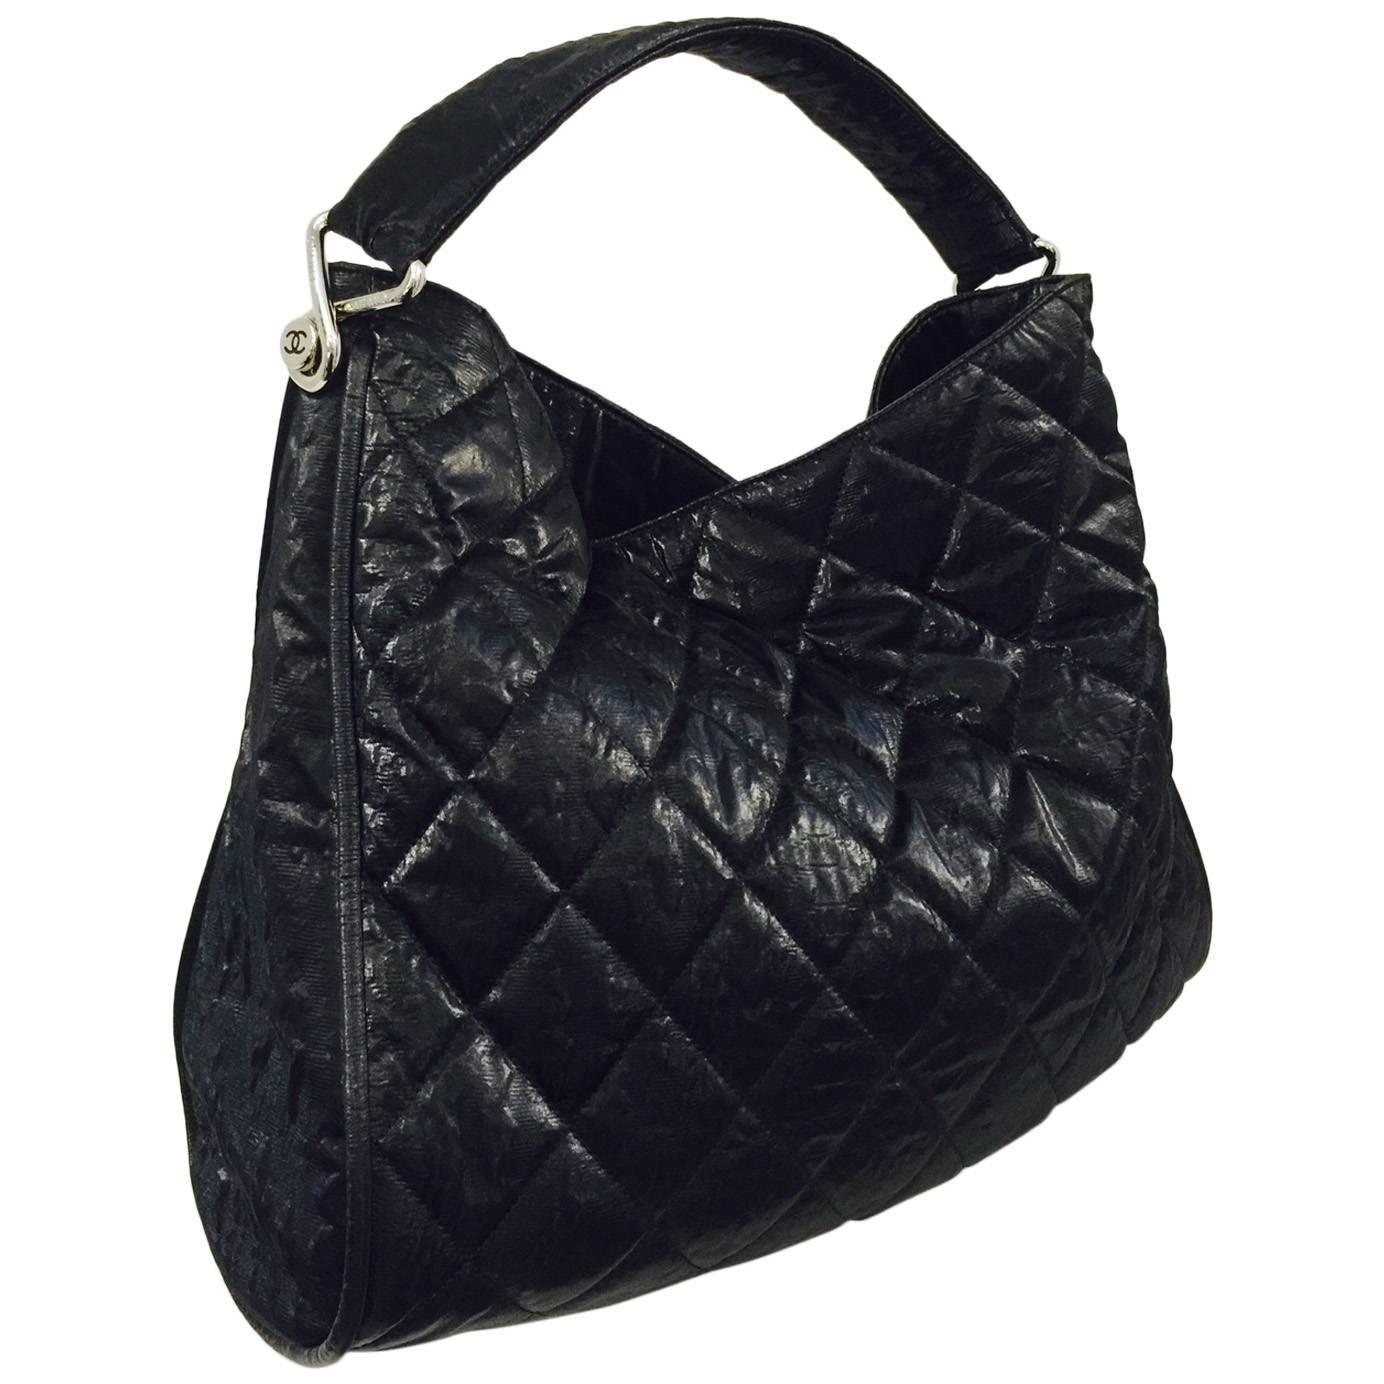 Chanel Black Quilted Coated Canvas Le Marais Large Hobo Bag Serial No.12339279 at 1stdibs